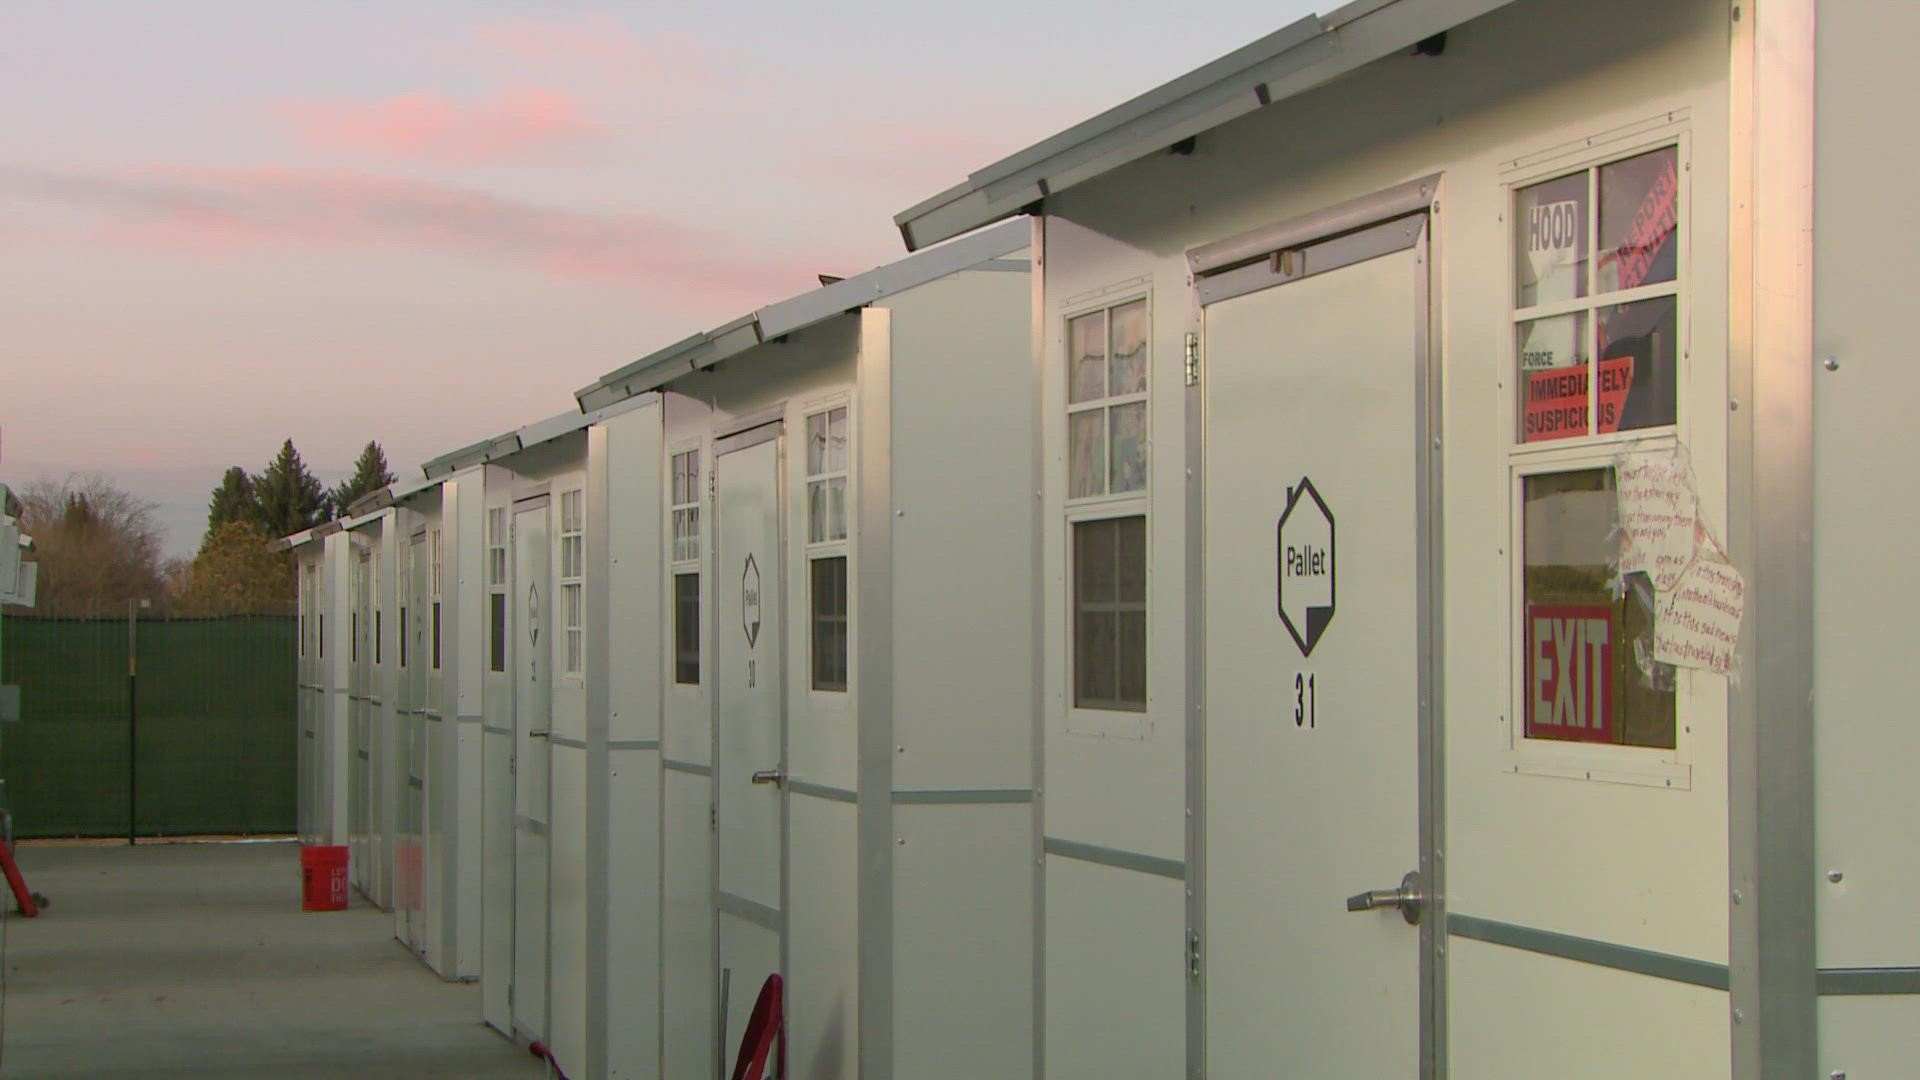 One man living at a pallet shelter said he liked the idea of a  big campus of resources.